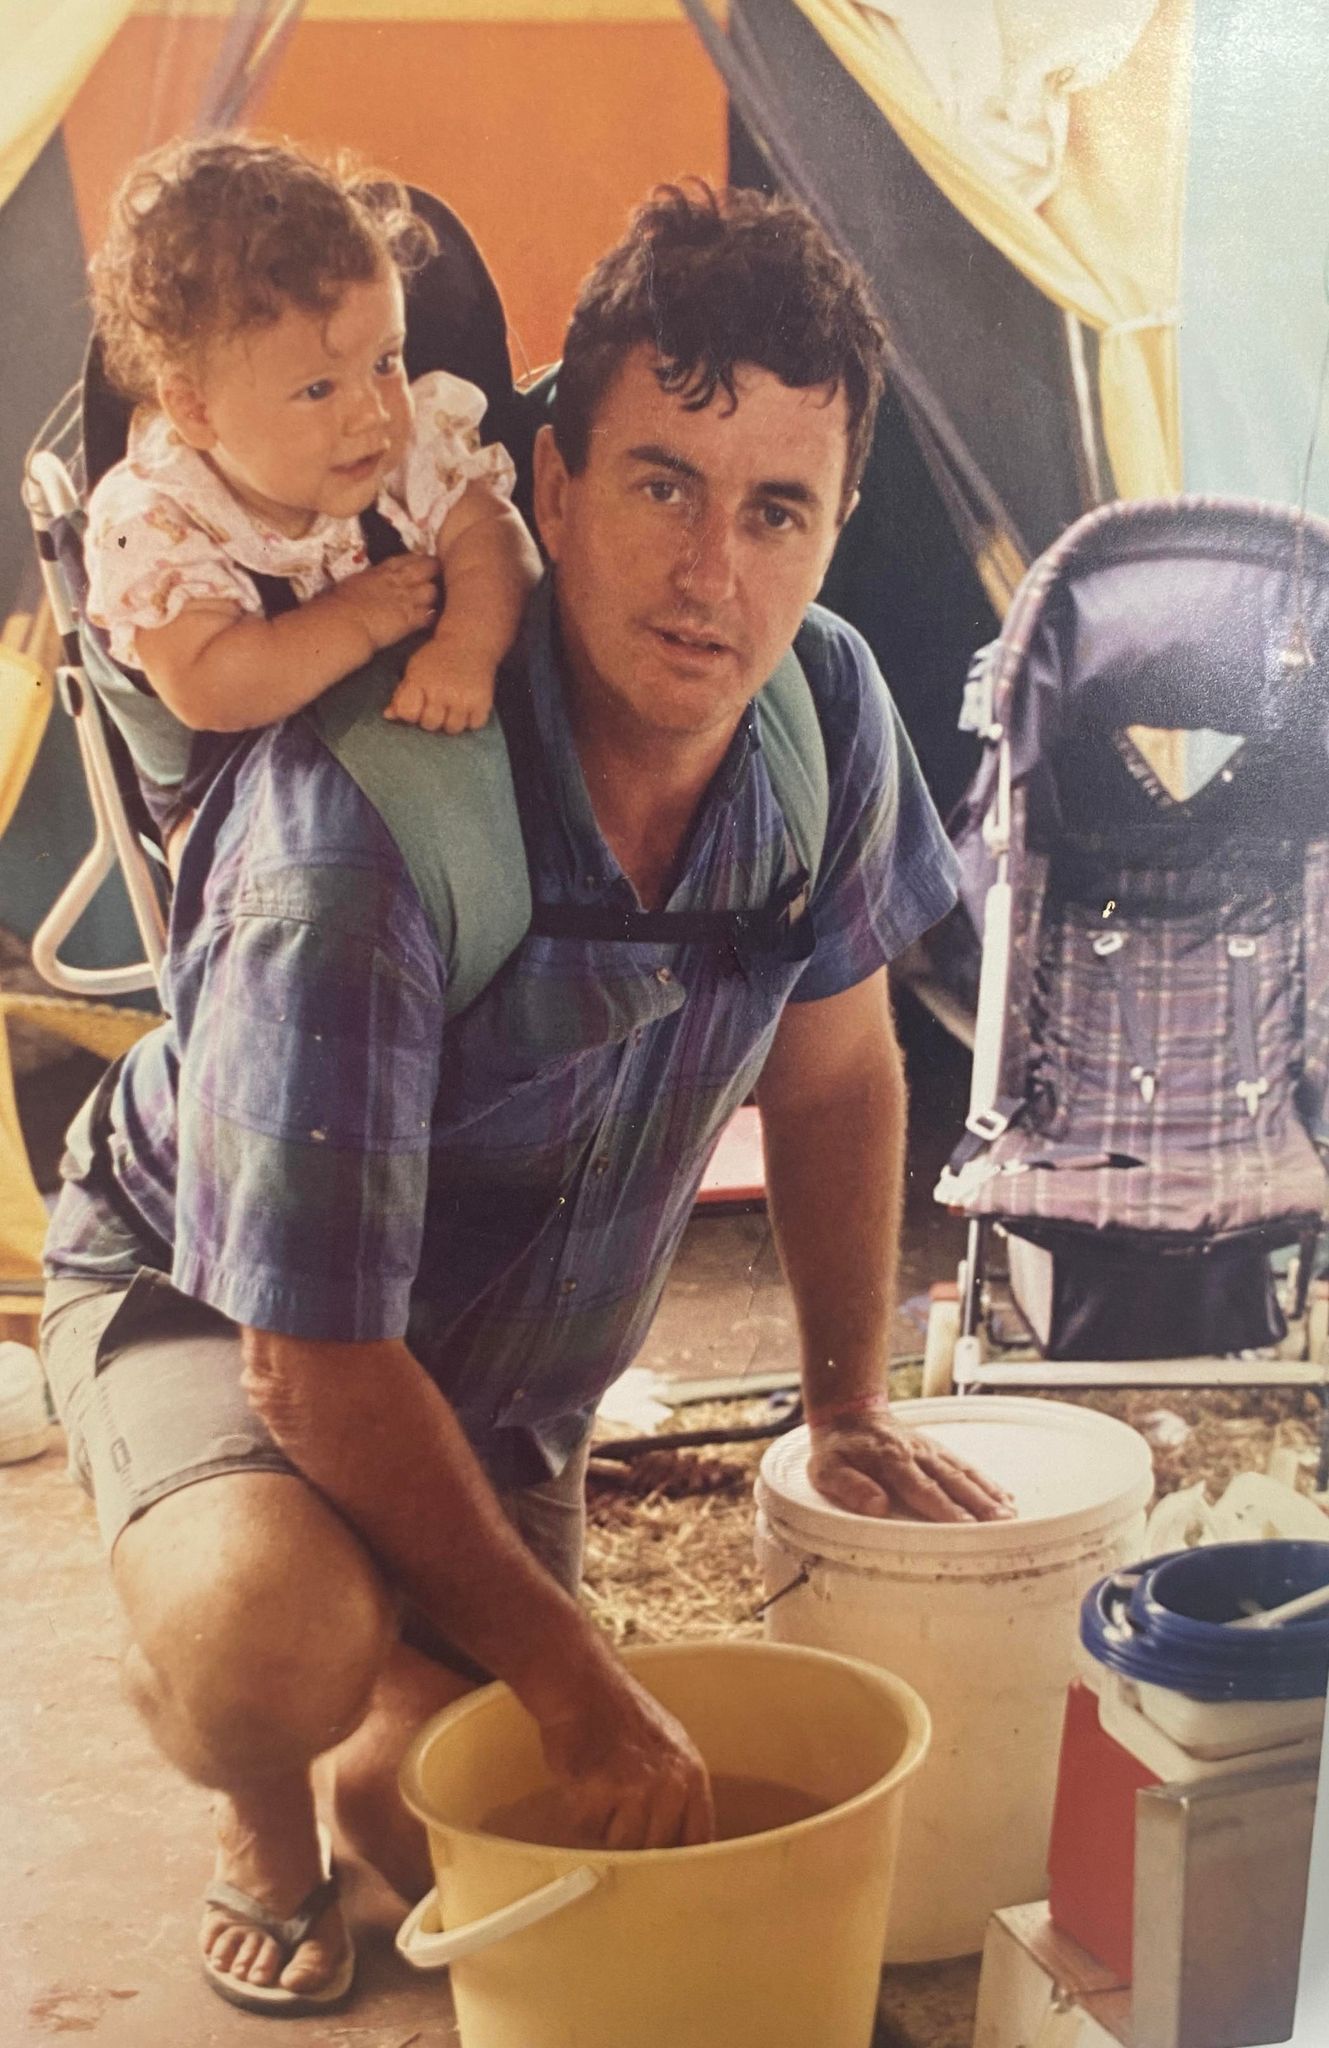 Alan Ballantyne with his daughter on his back and his hands in two buckets, a pram is visible behind